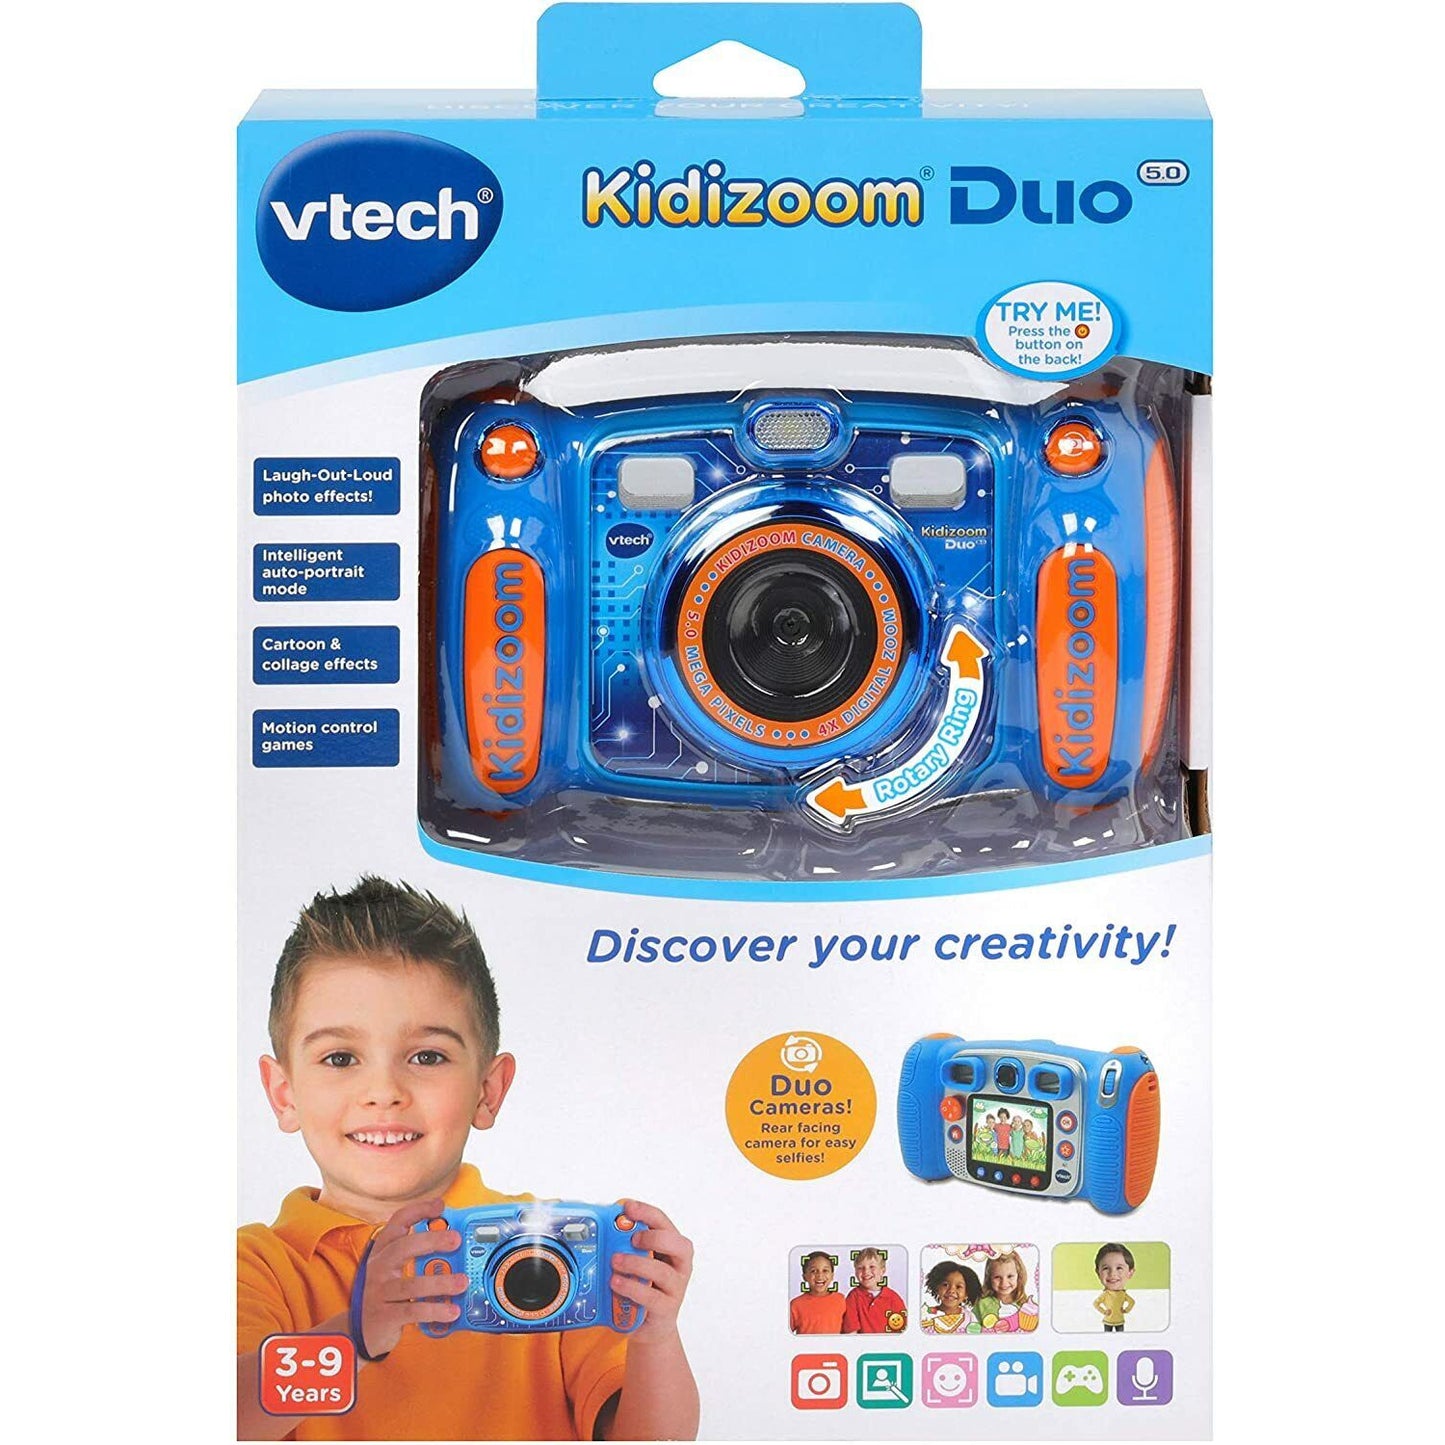 VTech Kidizoom® Duo 5.0 Photos Video Electronic Digital Toy Camera For Kids